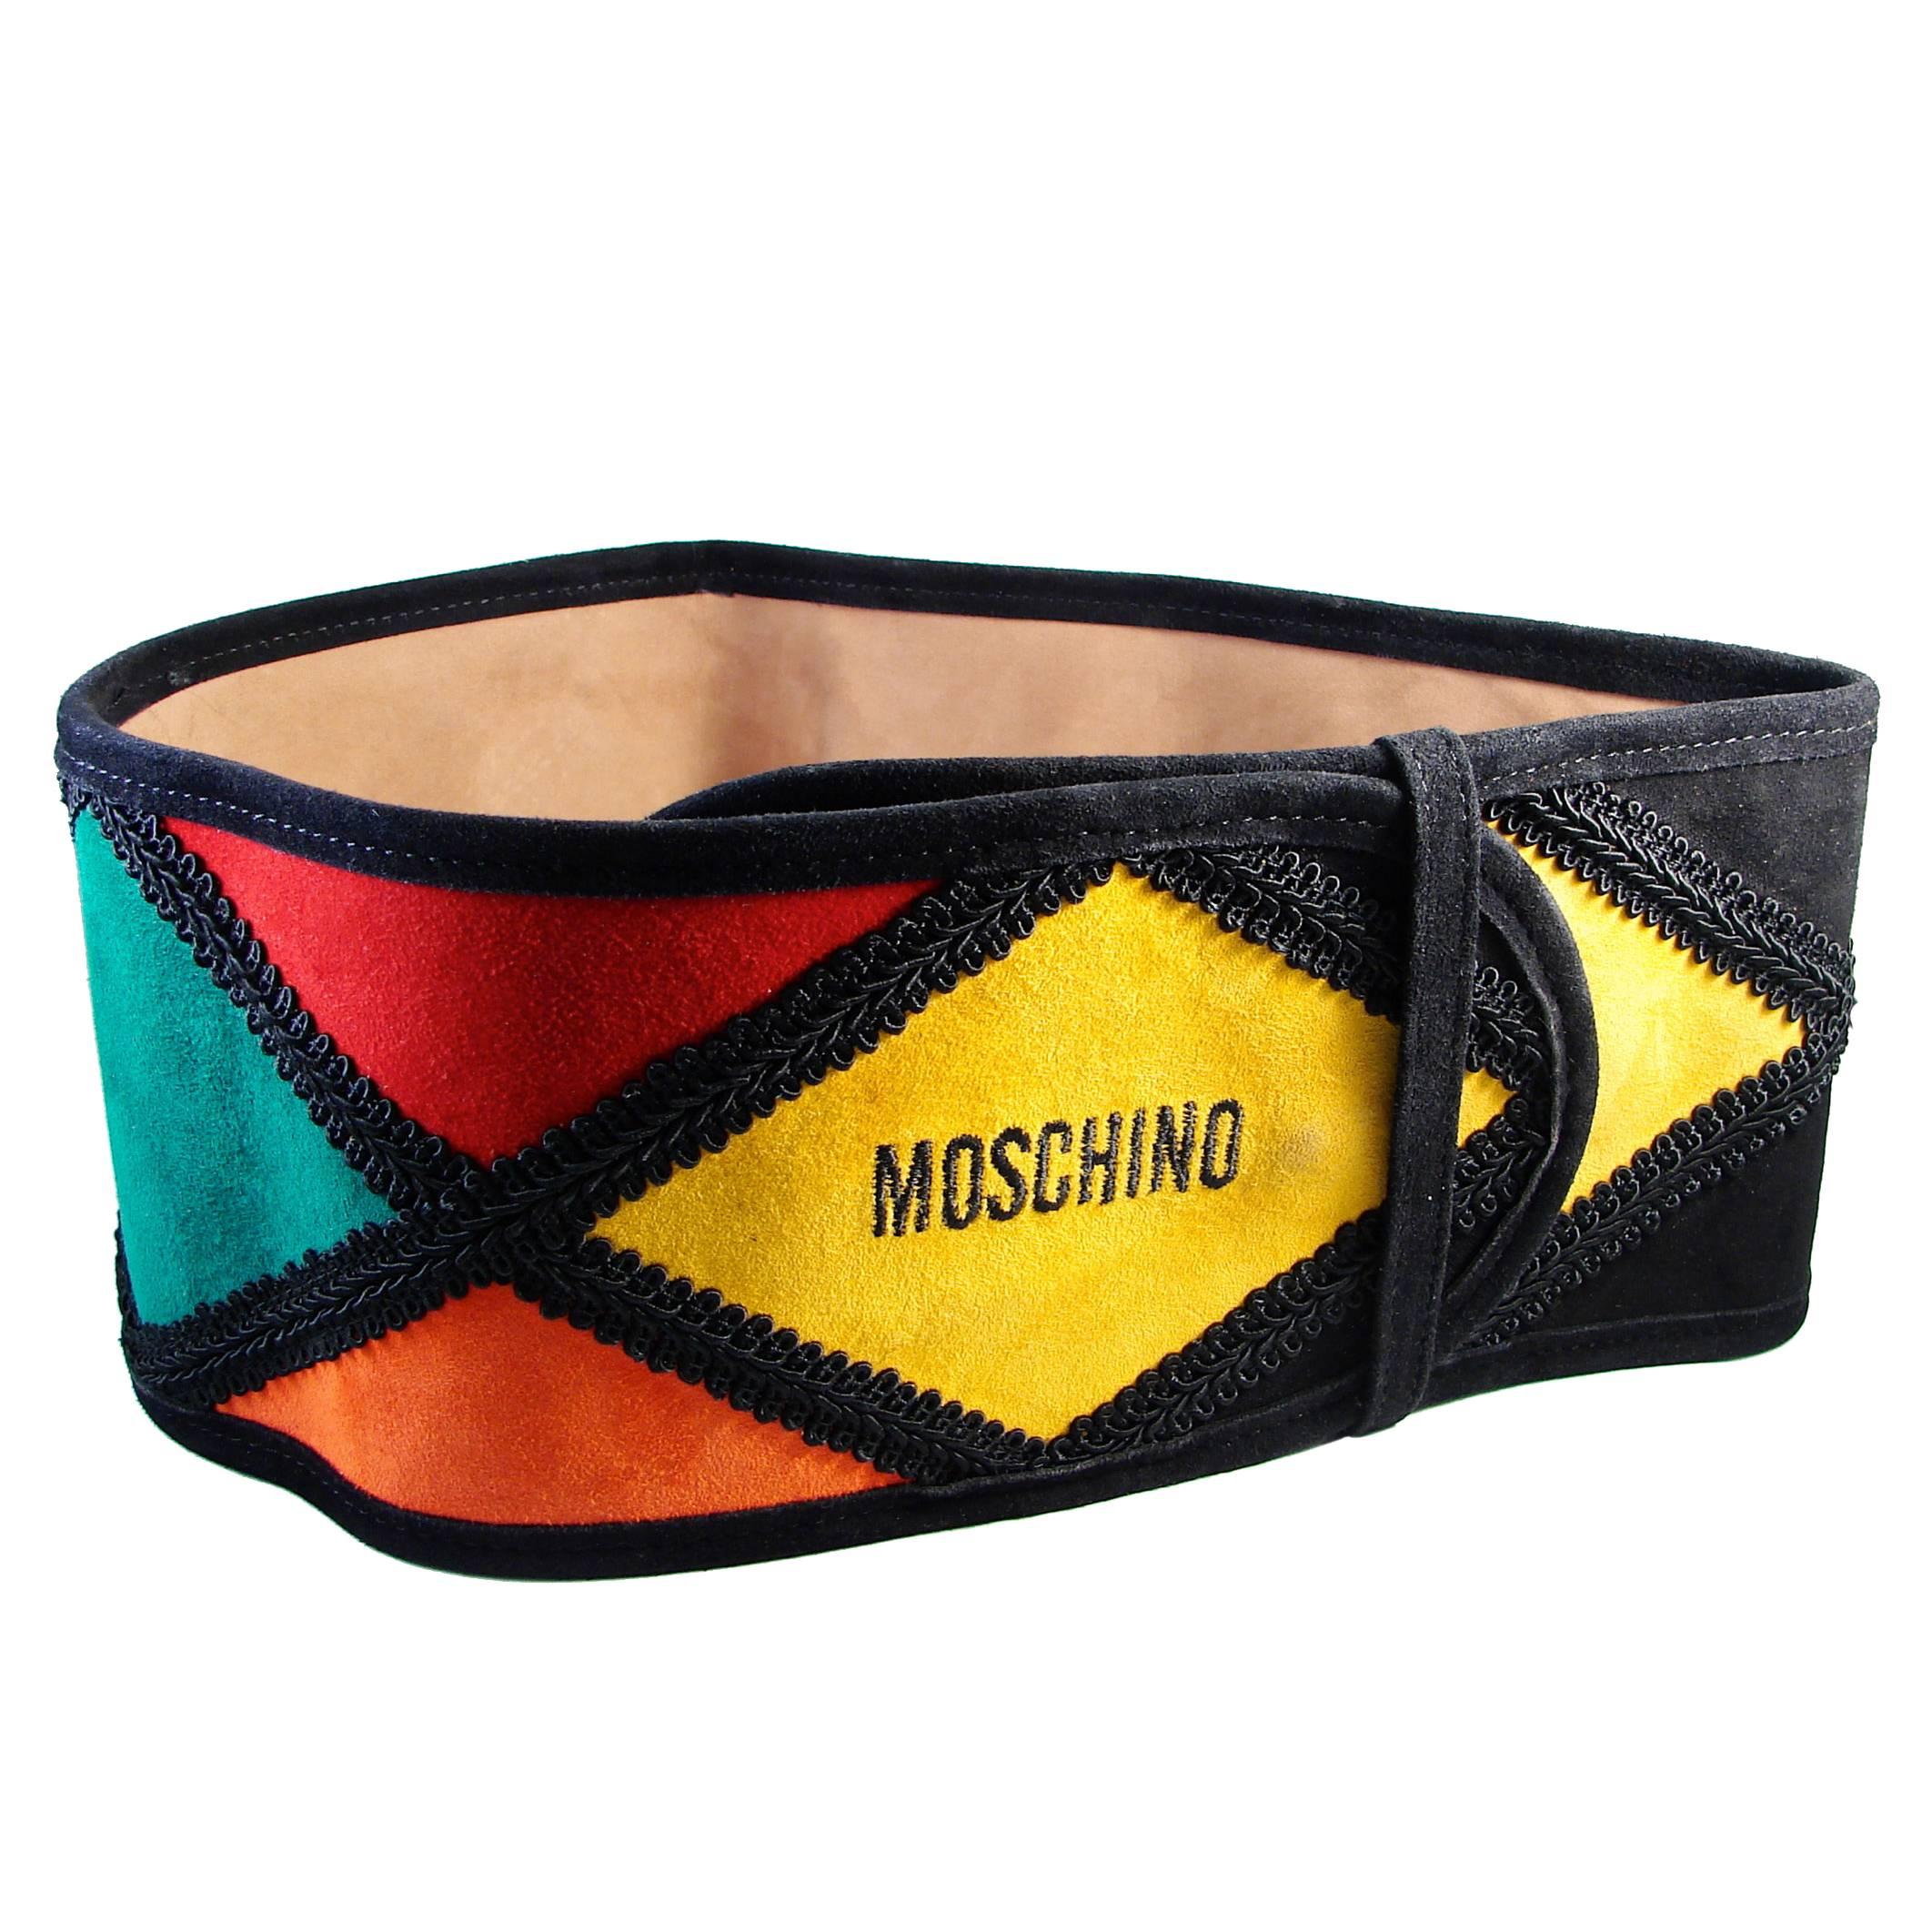 Moschino Belt Wide Harlequin Patch Multicolor Suede Leather Redwall Italy Rare For Sale